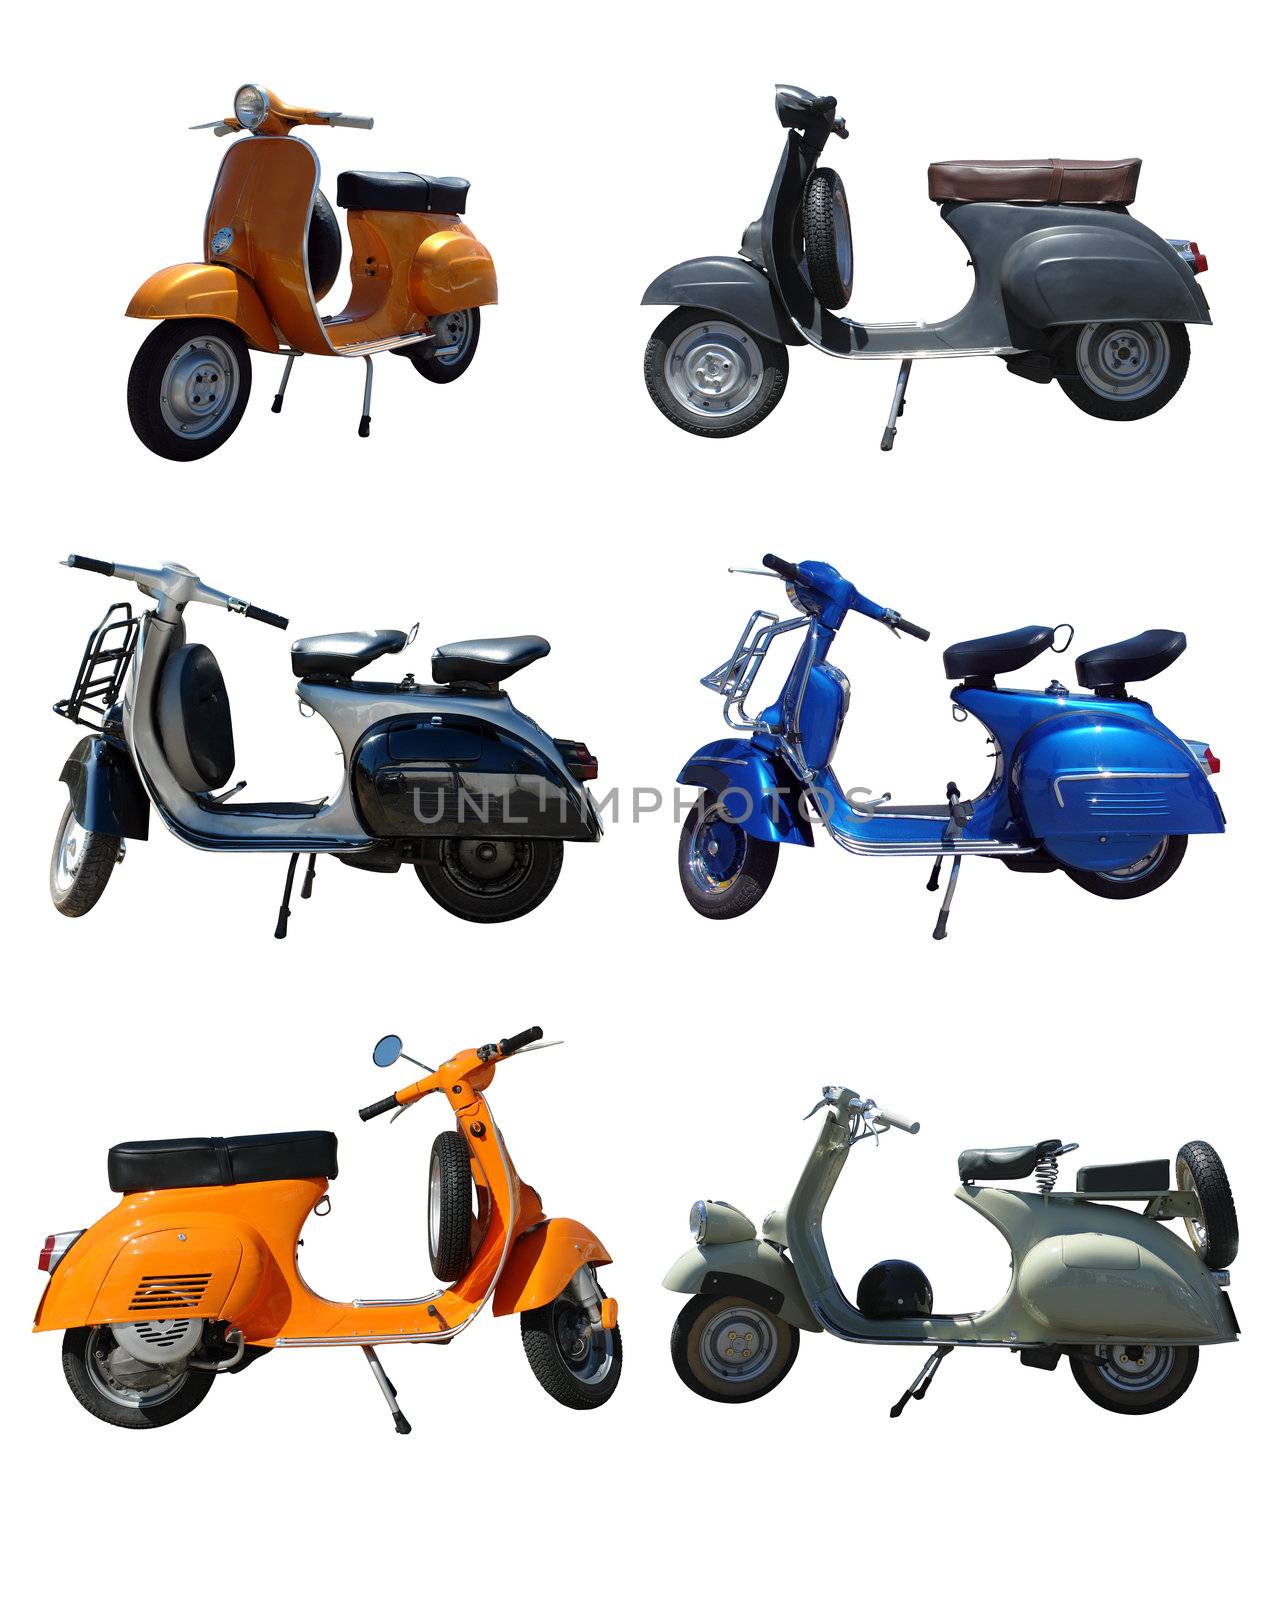 Vintage Scooters by simas2